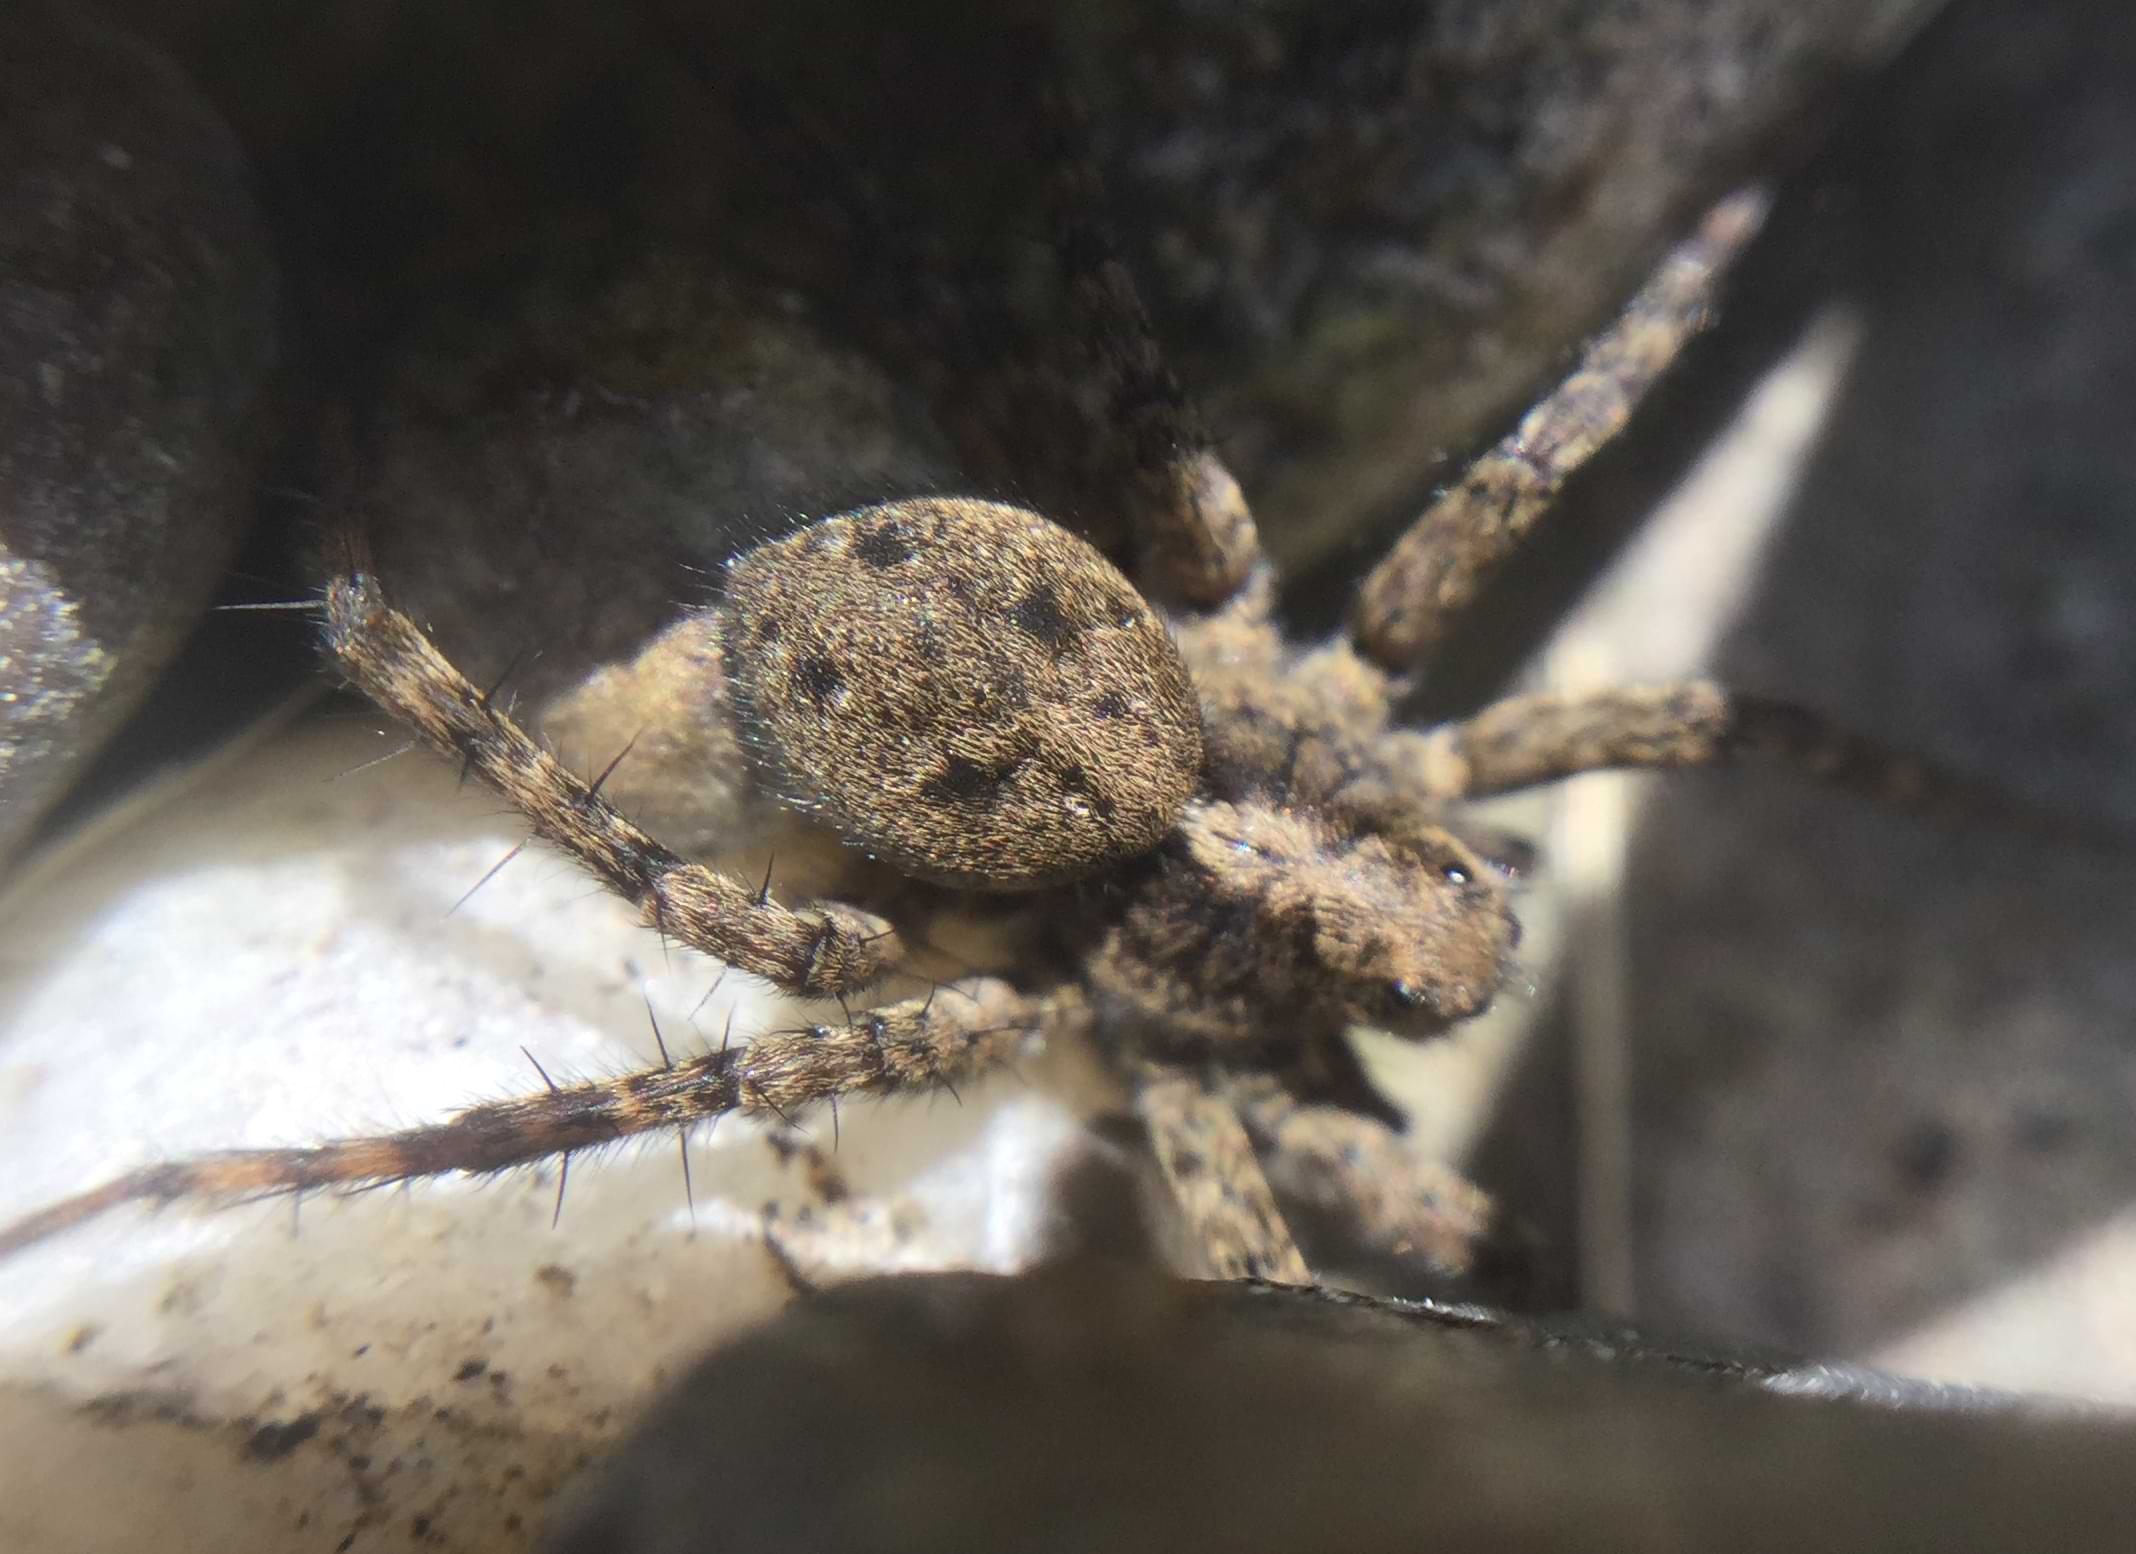 A bird's-eye view of the same spider. There are four darker patches of fur on the top of her abdomen.